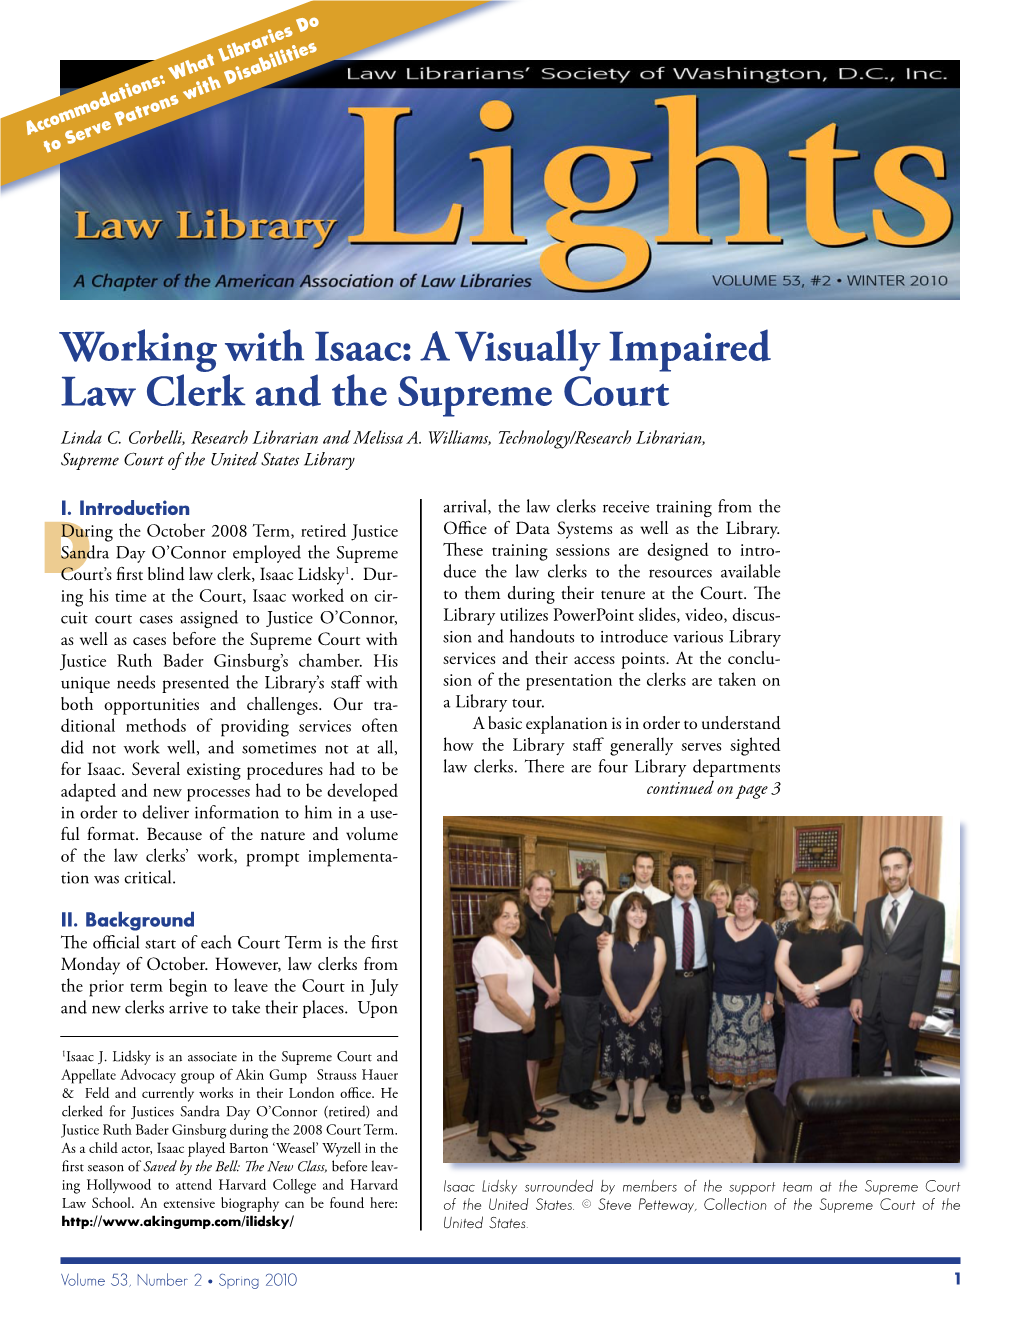 A Visually Impaired Law Clerk and the Supreme Court Linda C